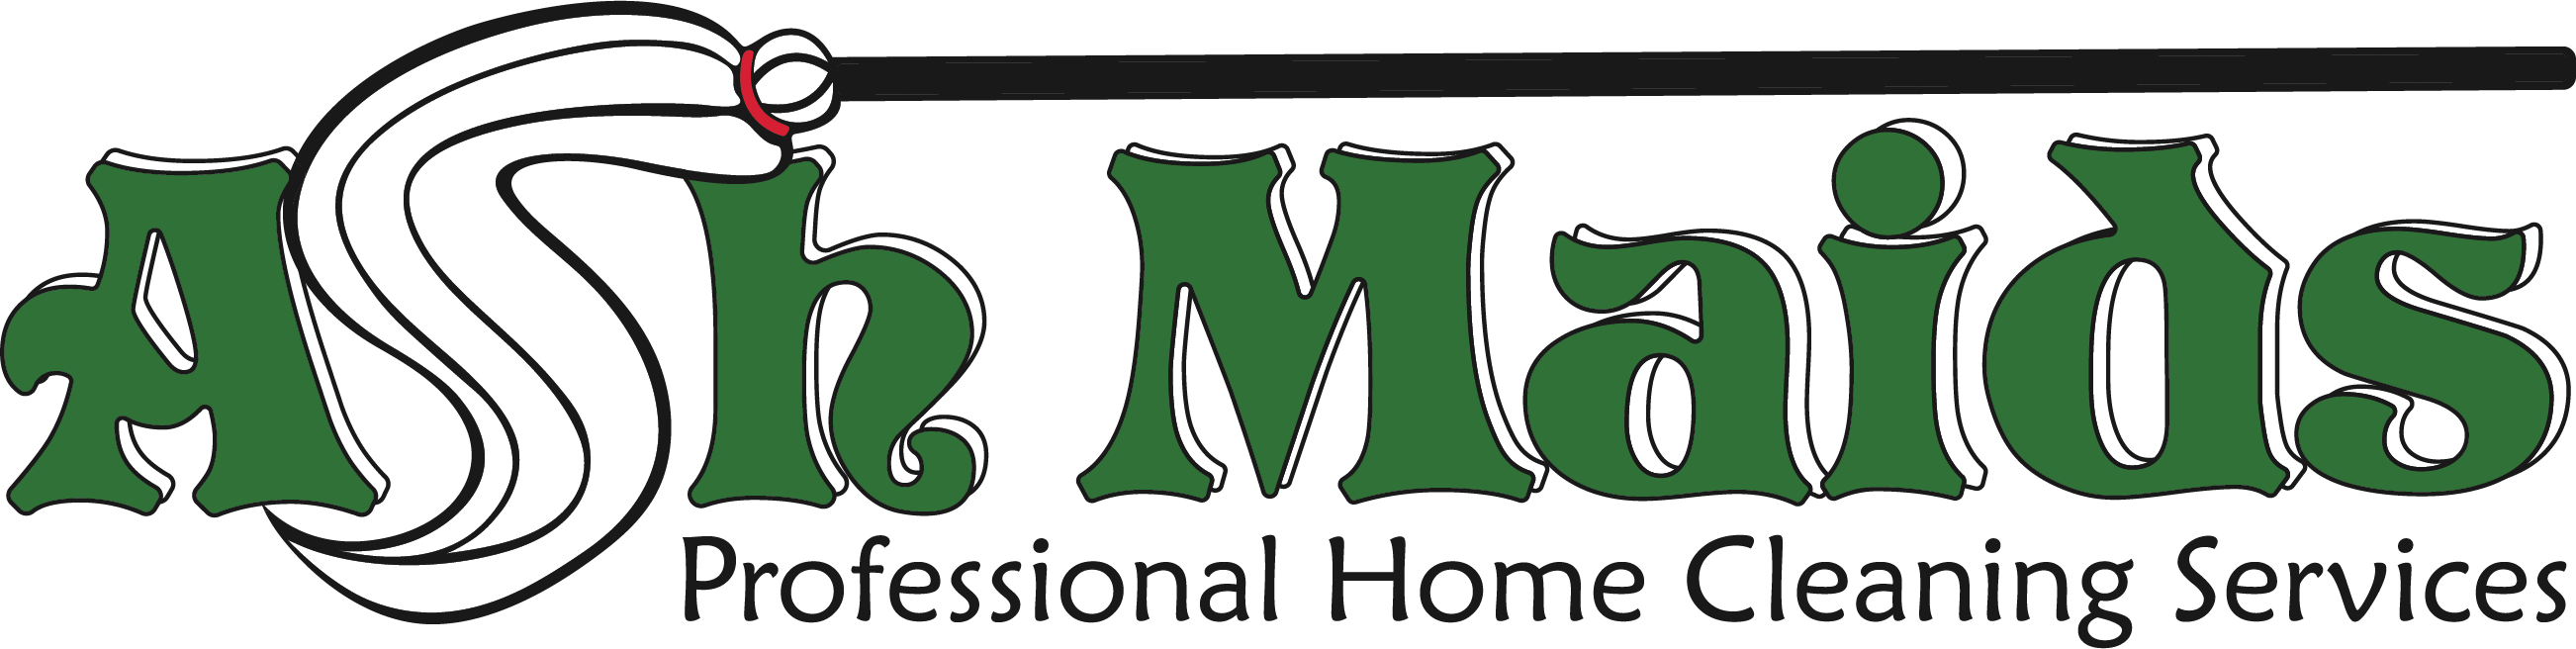 Maid Services | VA MD DC - The best Home Cleaning Services in the DMV